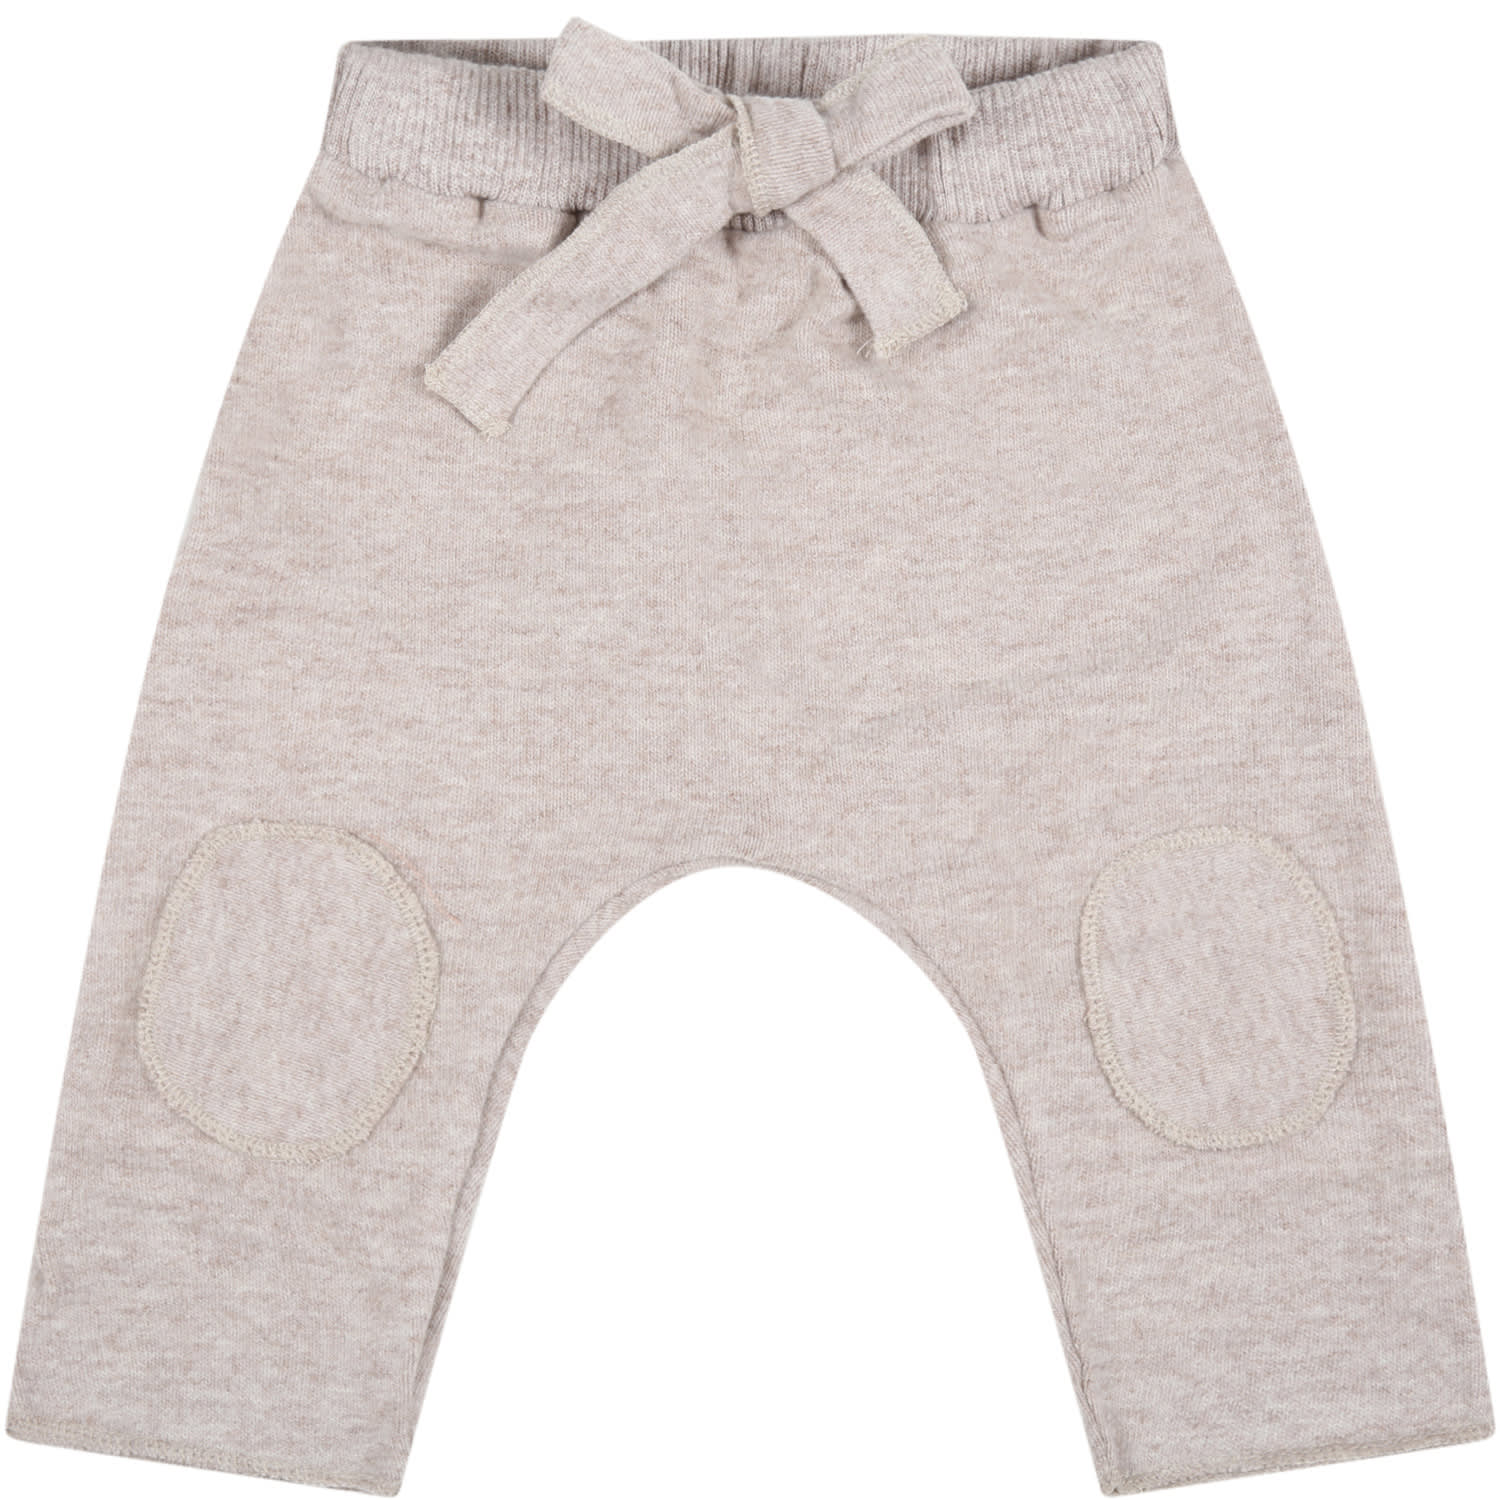 Caffe dOrzo Beige dafne Trousers For Baby Girl With Bow